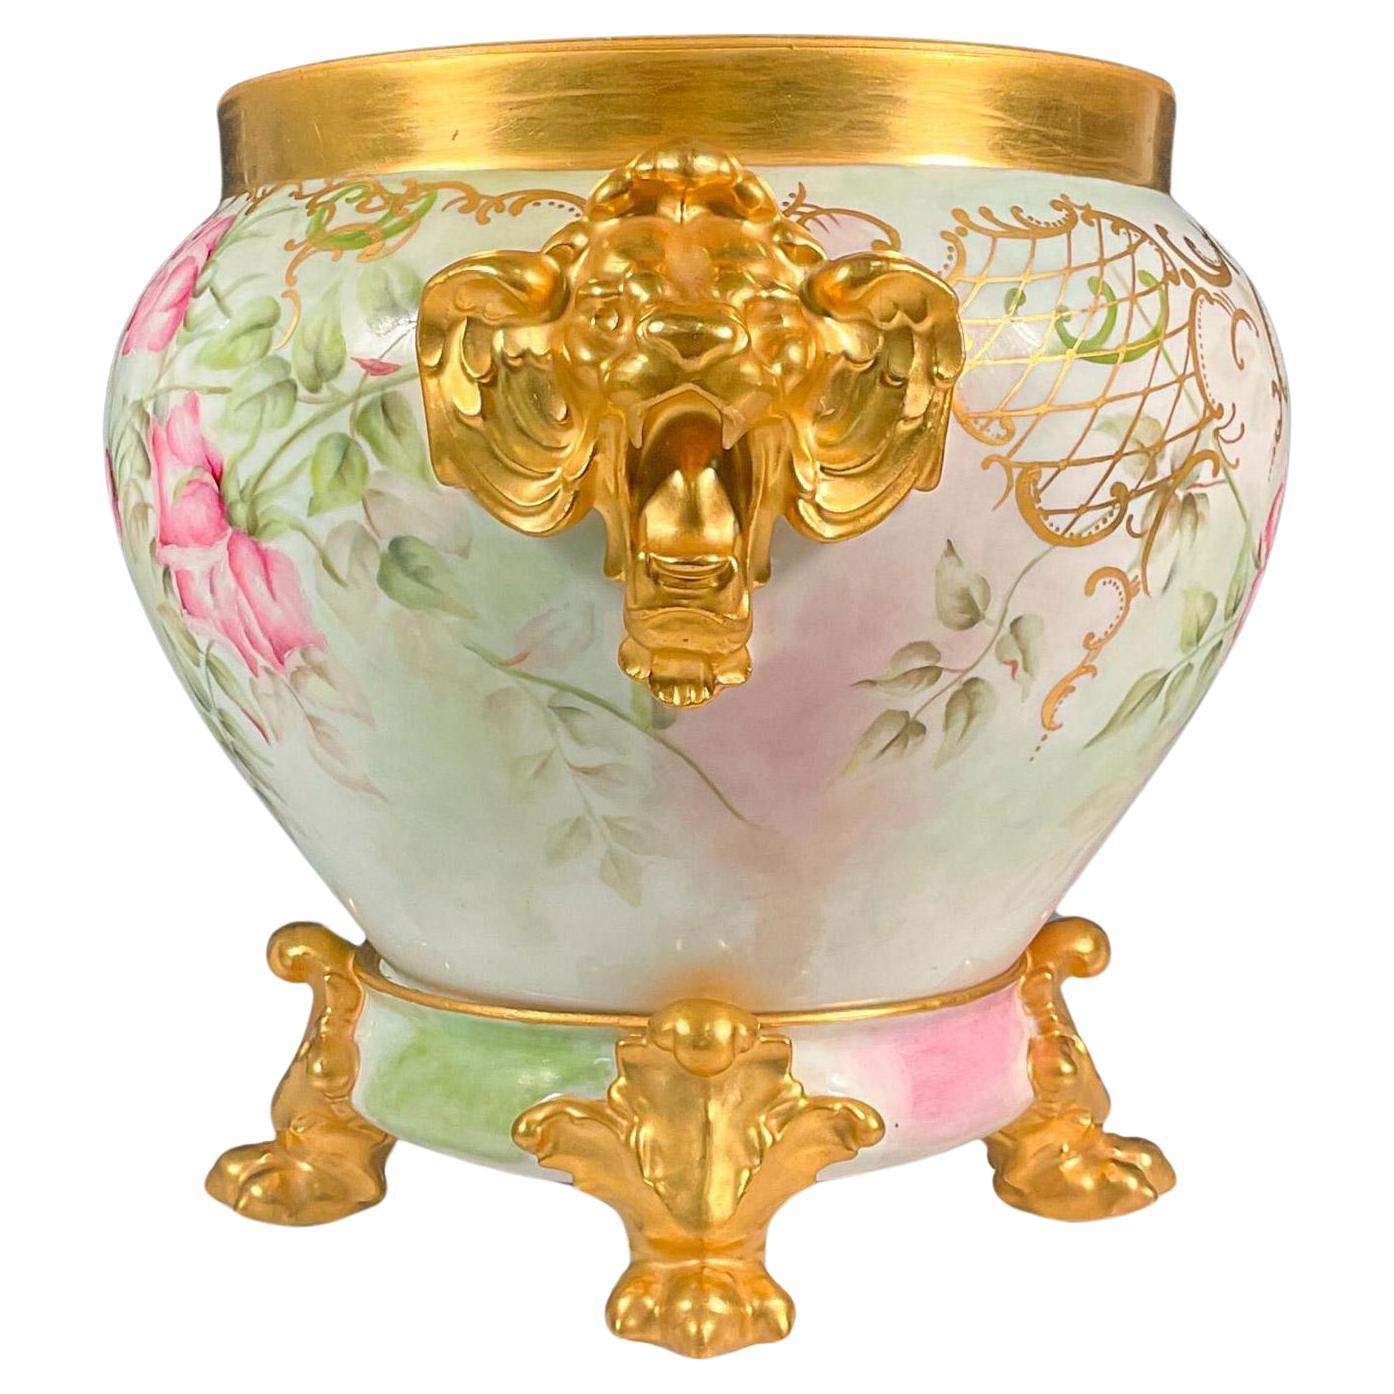 Presenting an exquisite Mid 20th Century Limoges porcelain jardiniere and stand set. This two-piece ensemble features a stunning white, pink, and green-toned planter, adorned with luxurious gold accents. Gold lion head handles are positioned on